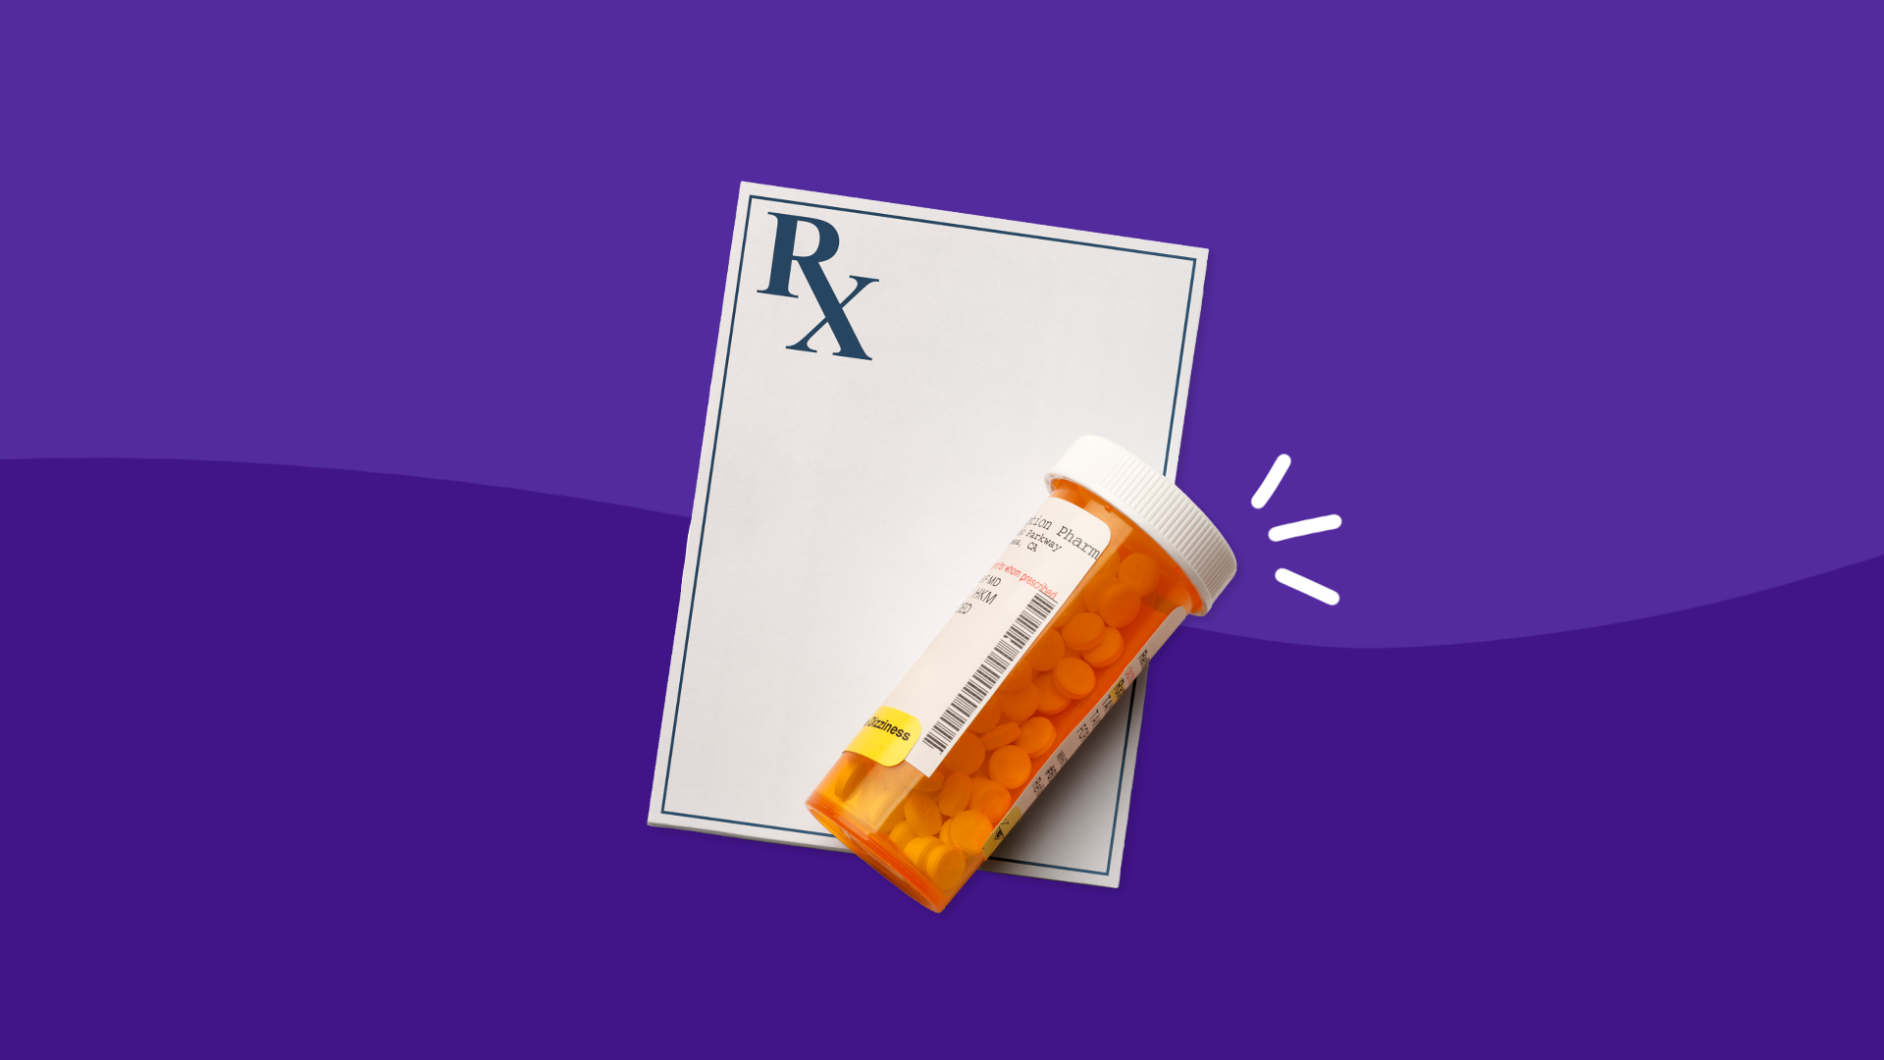 Prescription pad with pill bottle: Xanax side effects